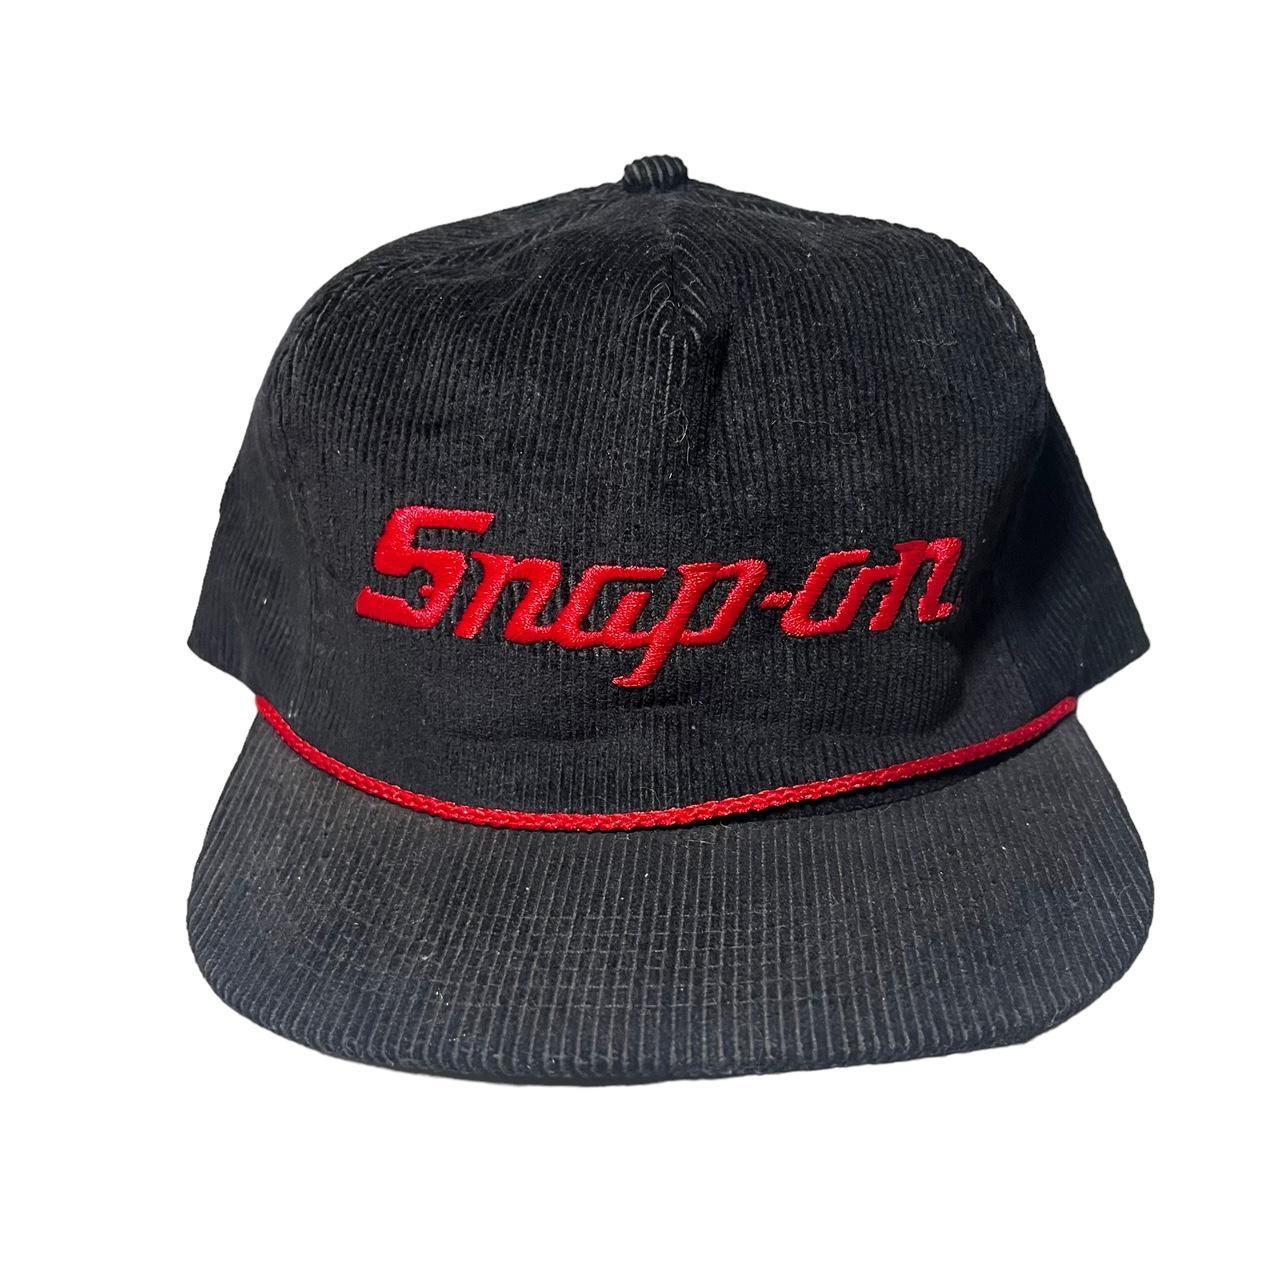 Men's Snap-on Hats, New & Used